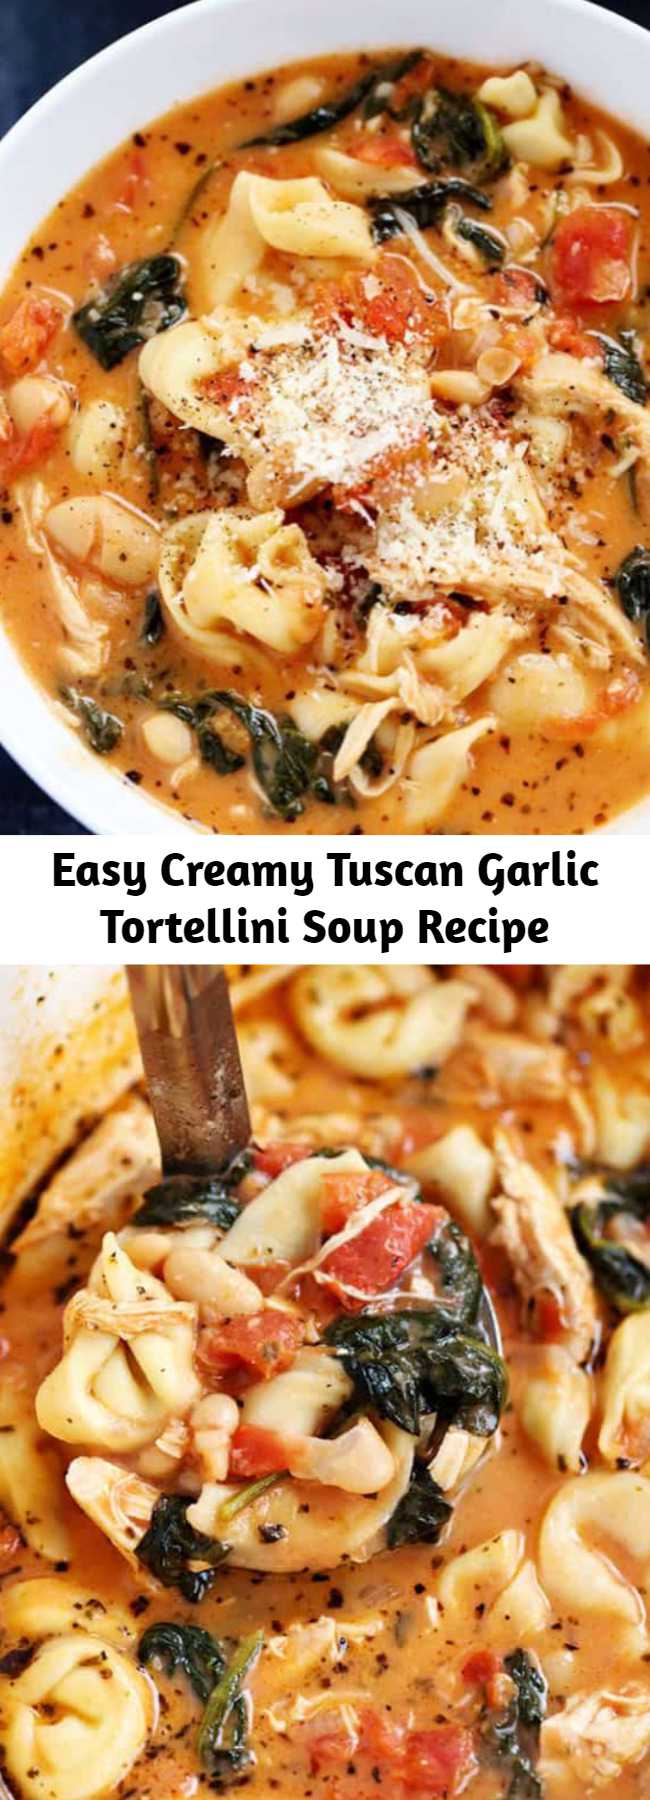 Easy Creamy Tuscan Garlic Tortellini Soup Recipe - Creamy Tuscan Garlic Tortellini Soup is so easy to make and one of the best soups that you will make! Tortellini, diced tomatoes spinach and white beans are hidden is the most creamy and delicious soup that your family will love!